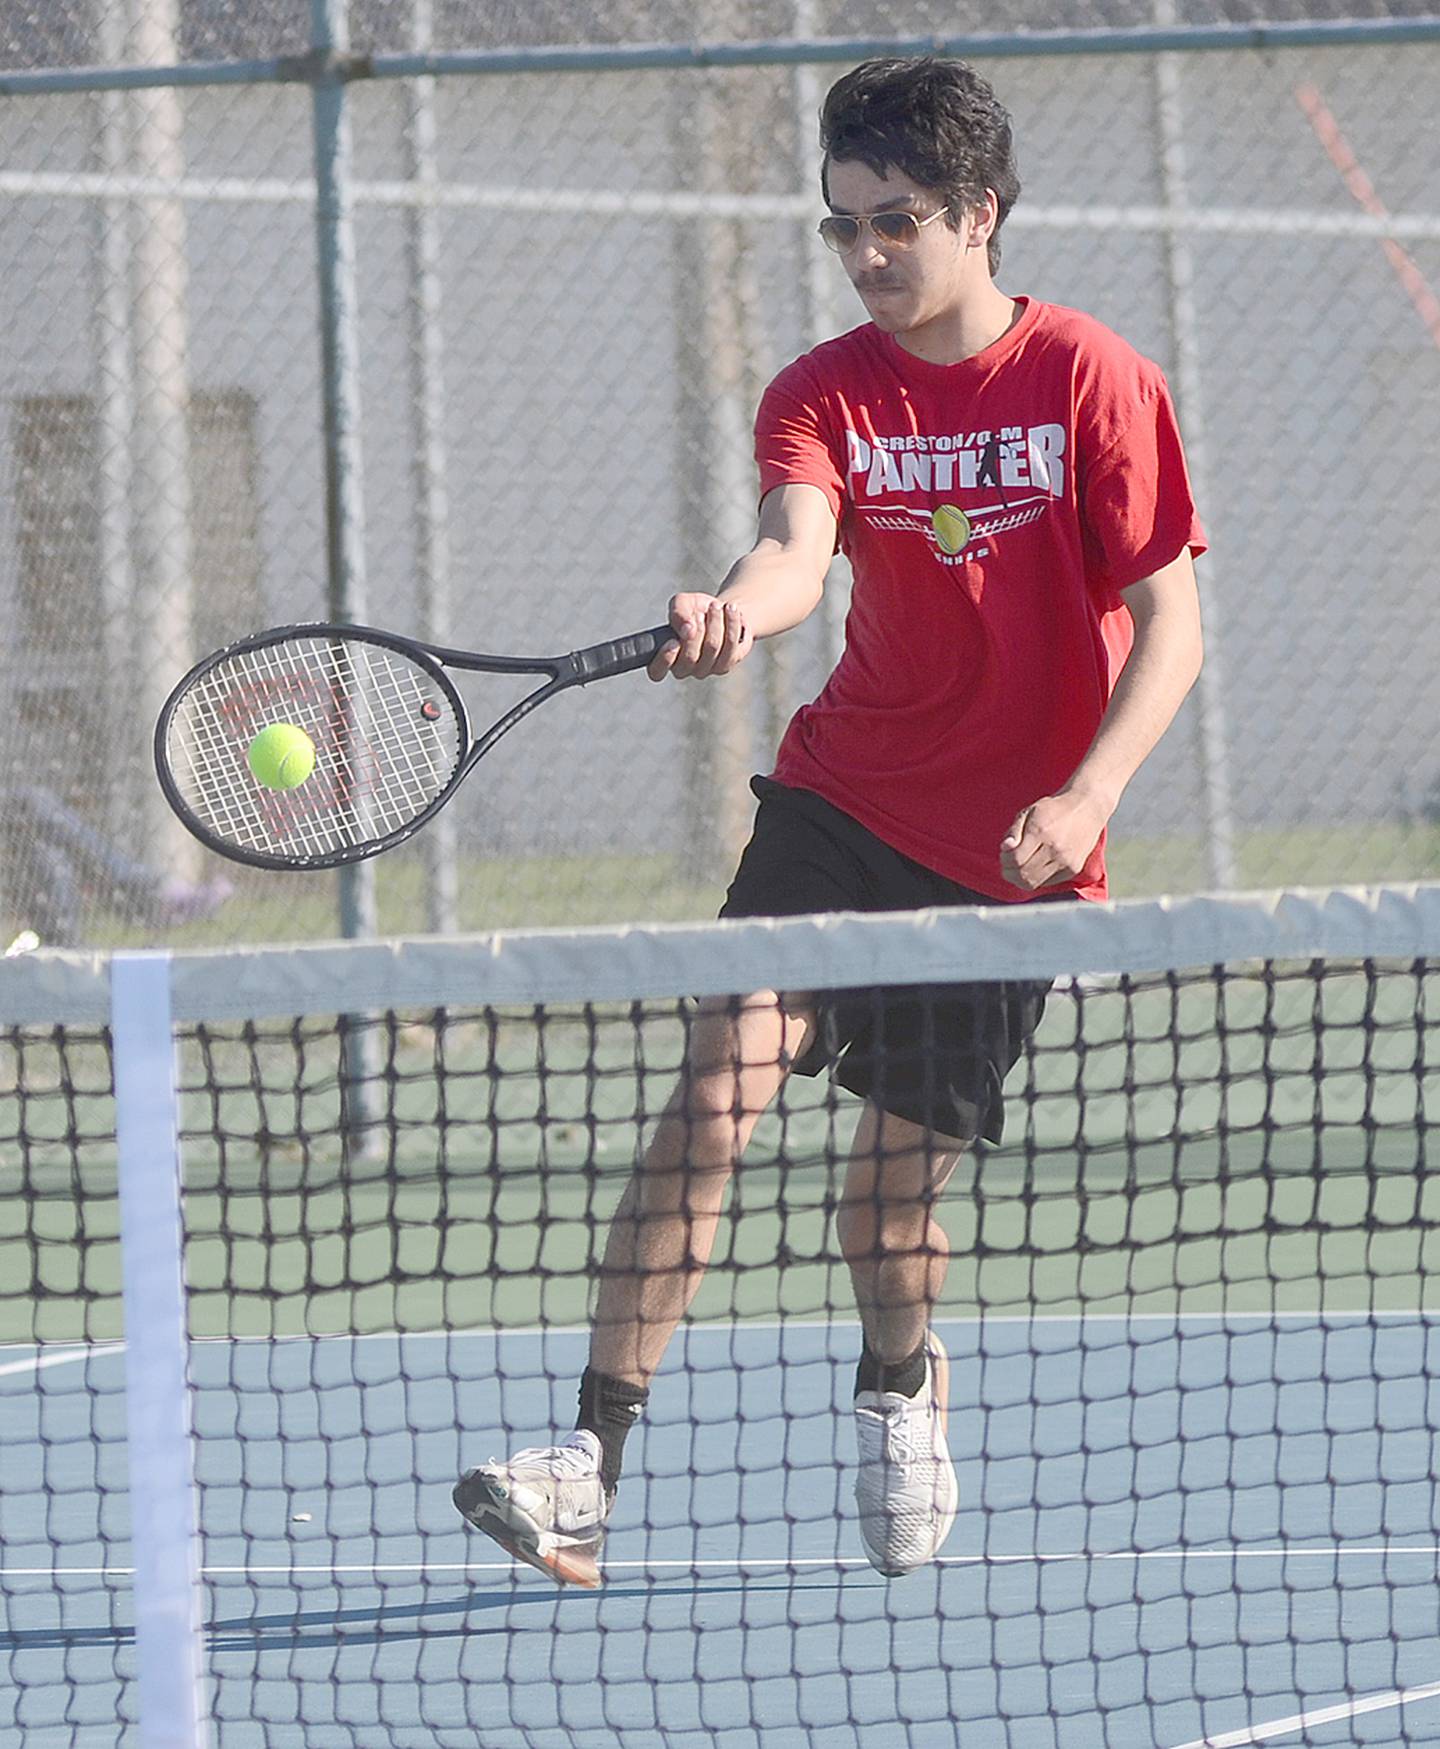 Creston's Ben Hill hits a forehand shot against Chariton Monday. Hill teamed with Damion Meyer for an 8-4 doubles win in the team's 6-3 dual victory.